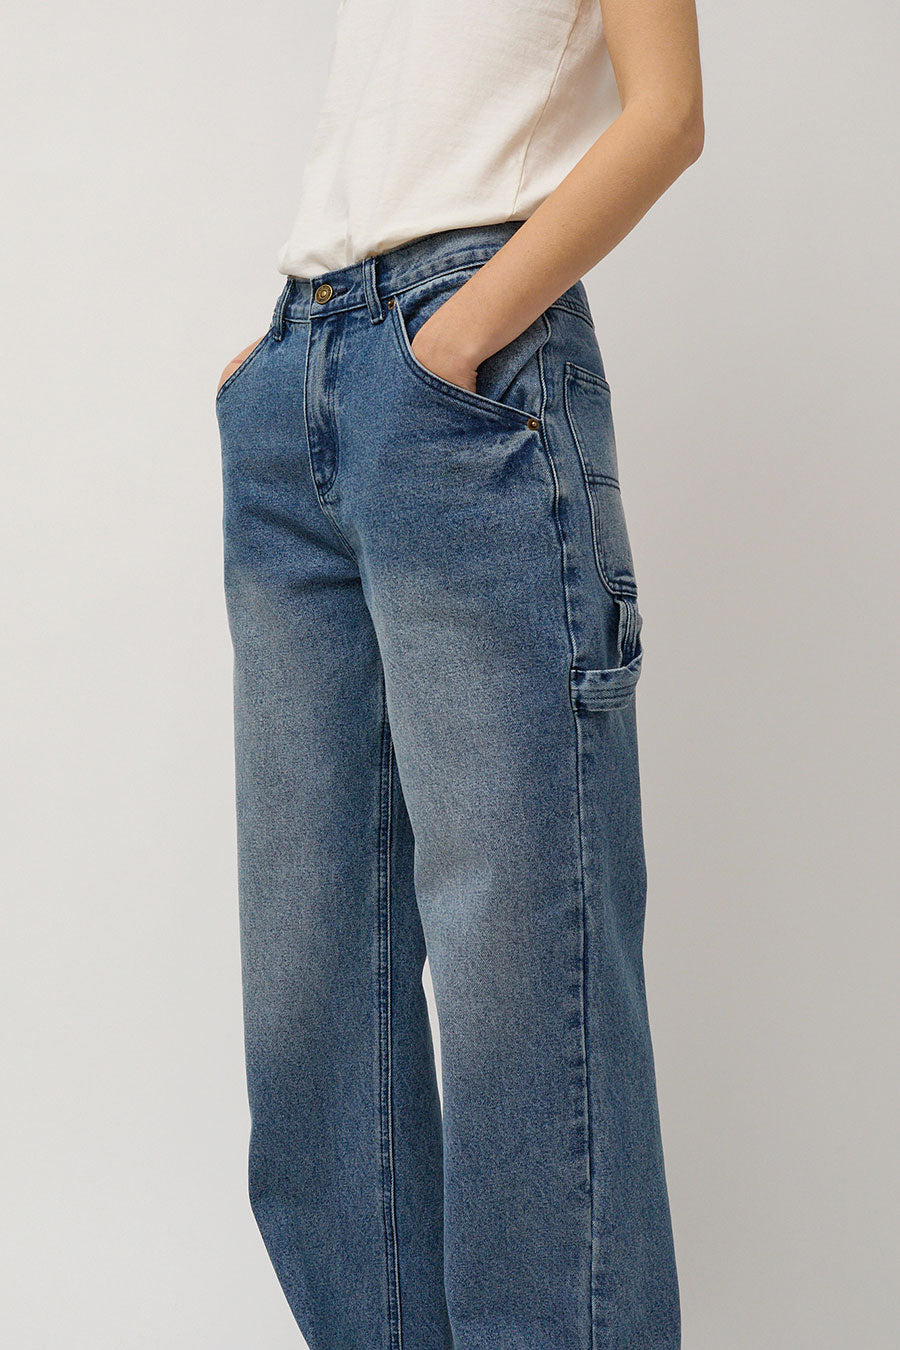 Long Inseam Jeans, Avery Mae Boutique